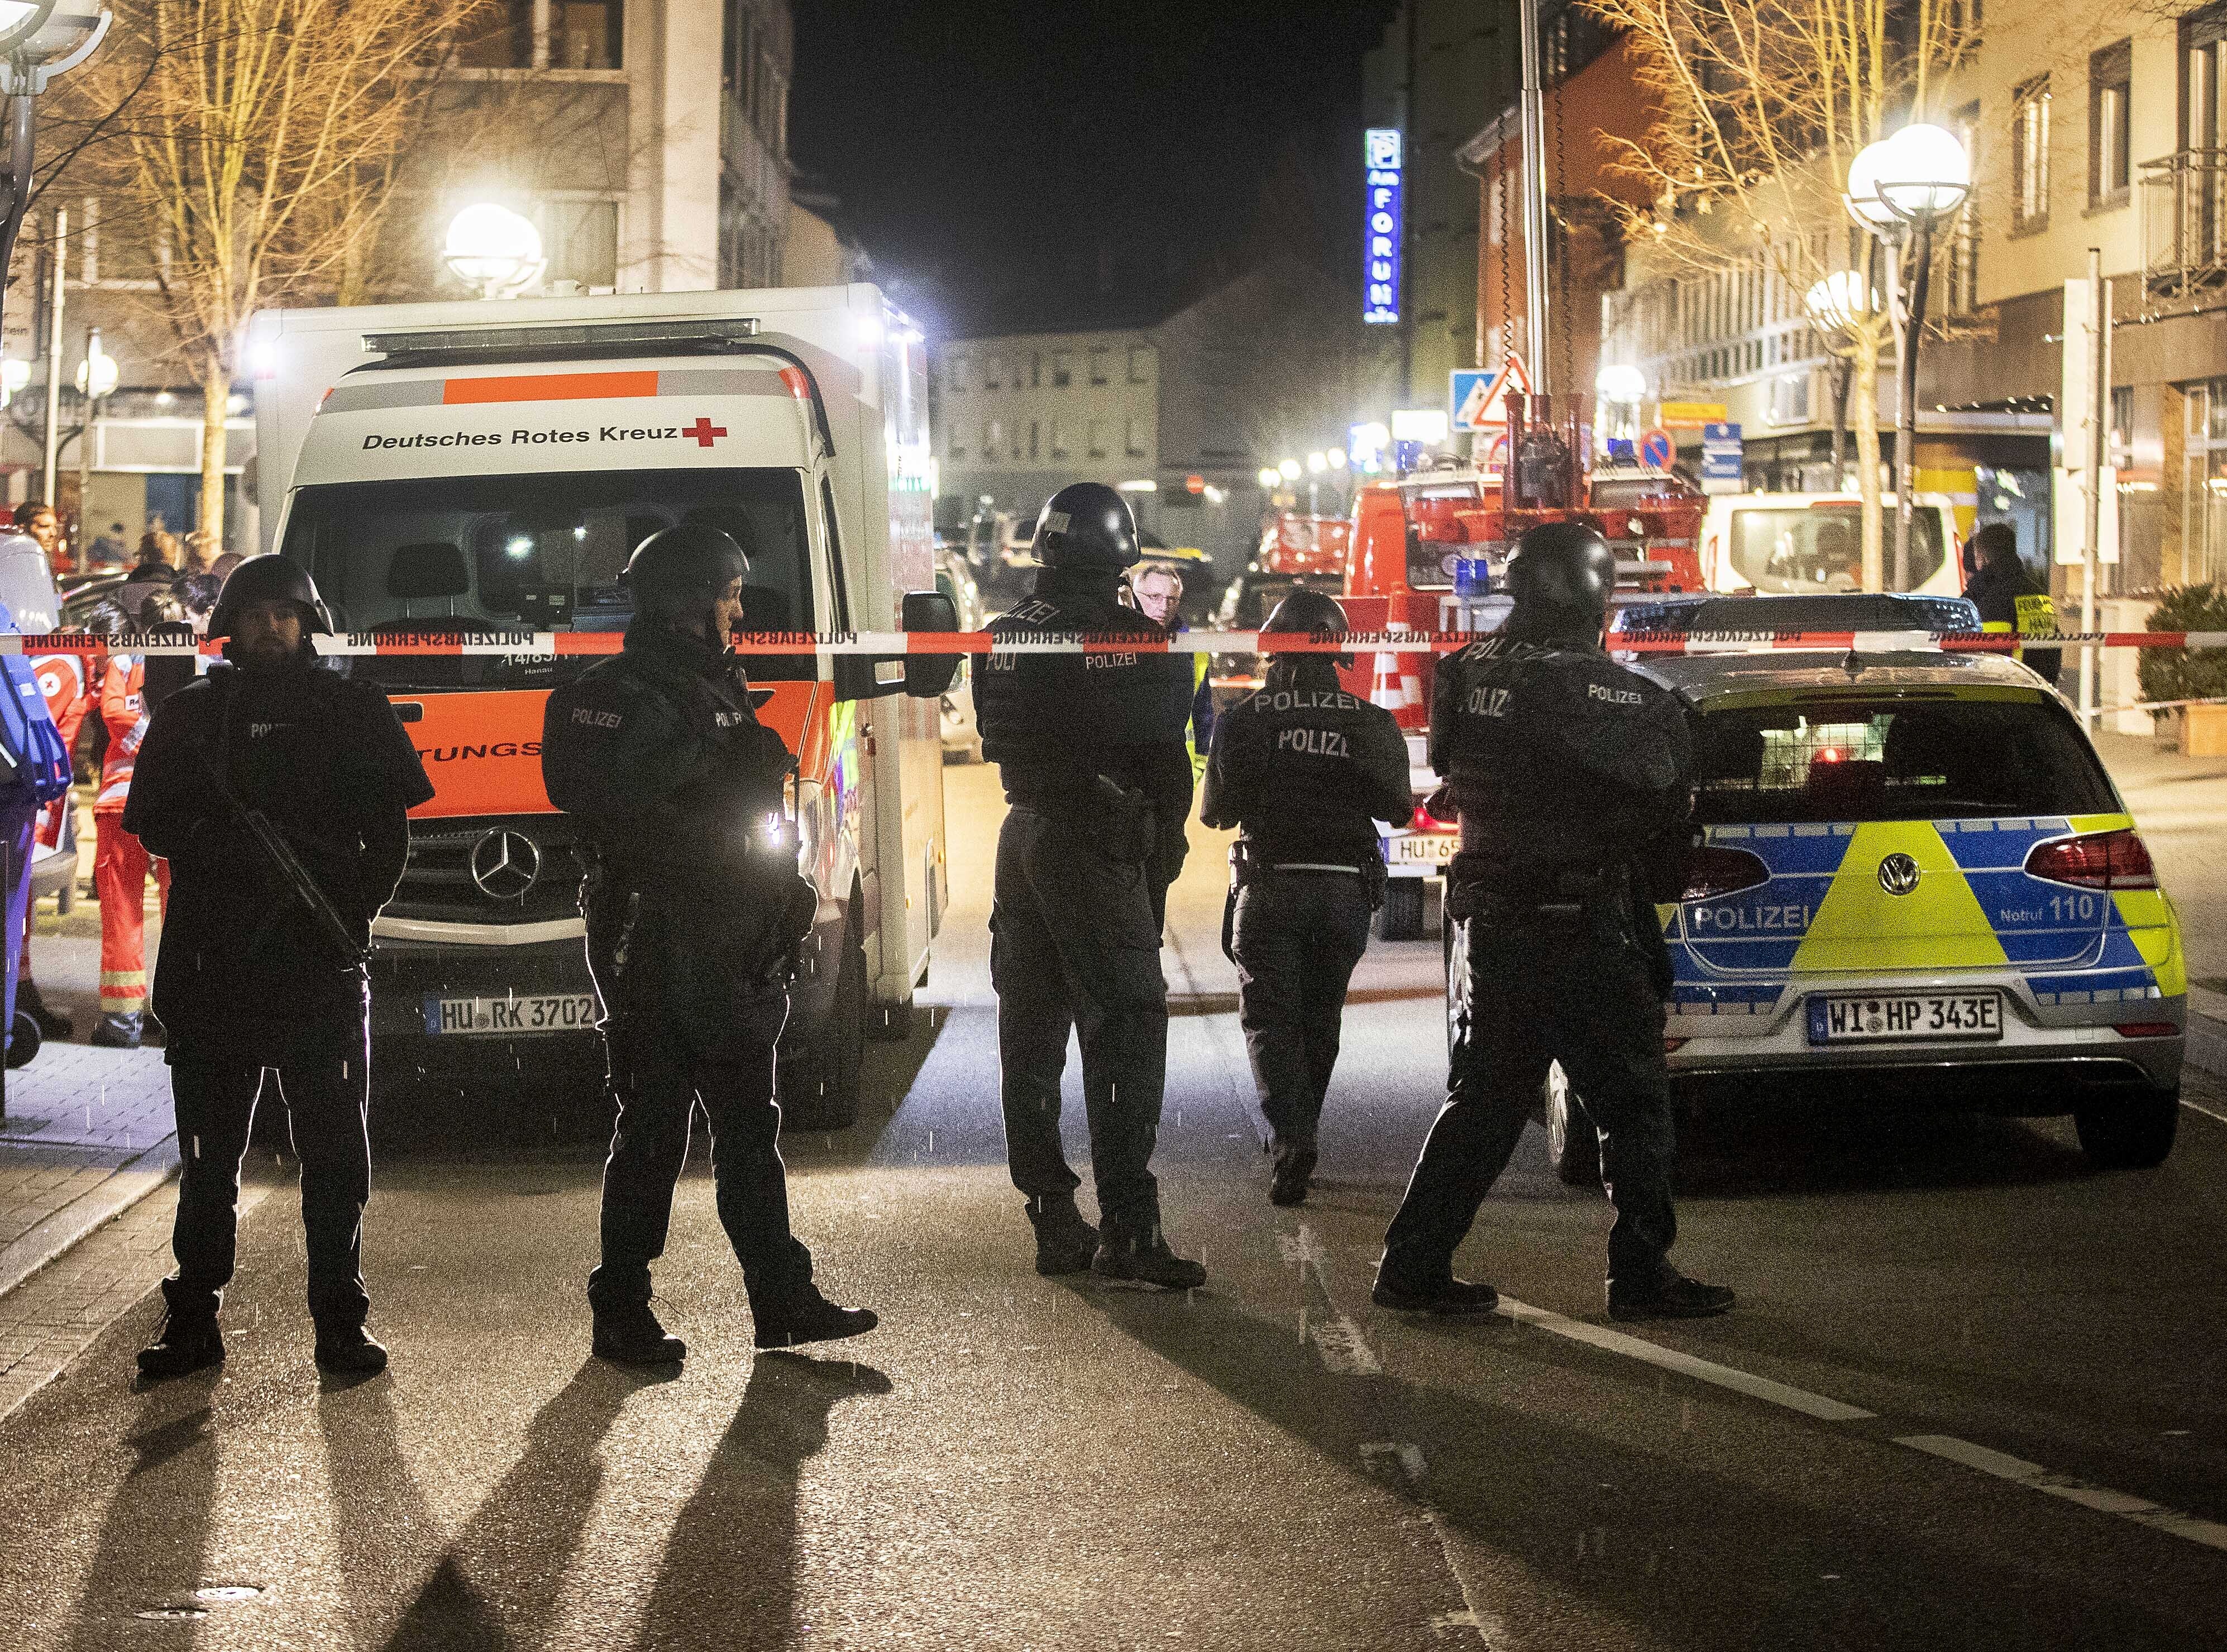  The victims were gunned down during attacks on two shisha bars barely two miles apart in Hanau